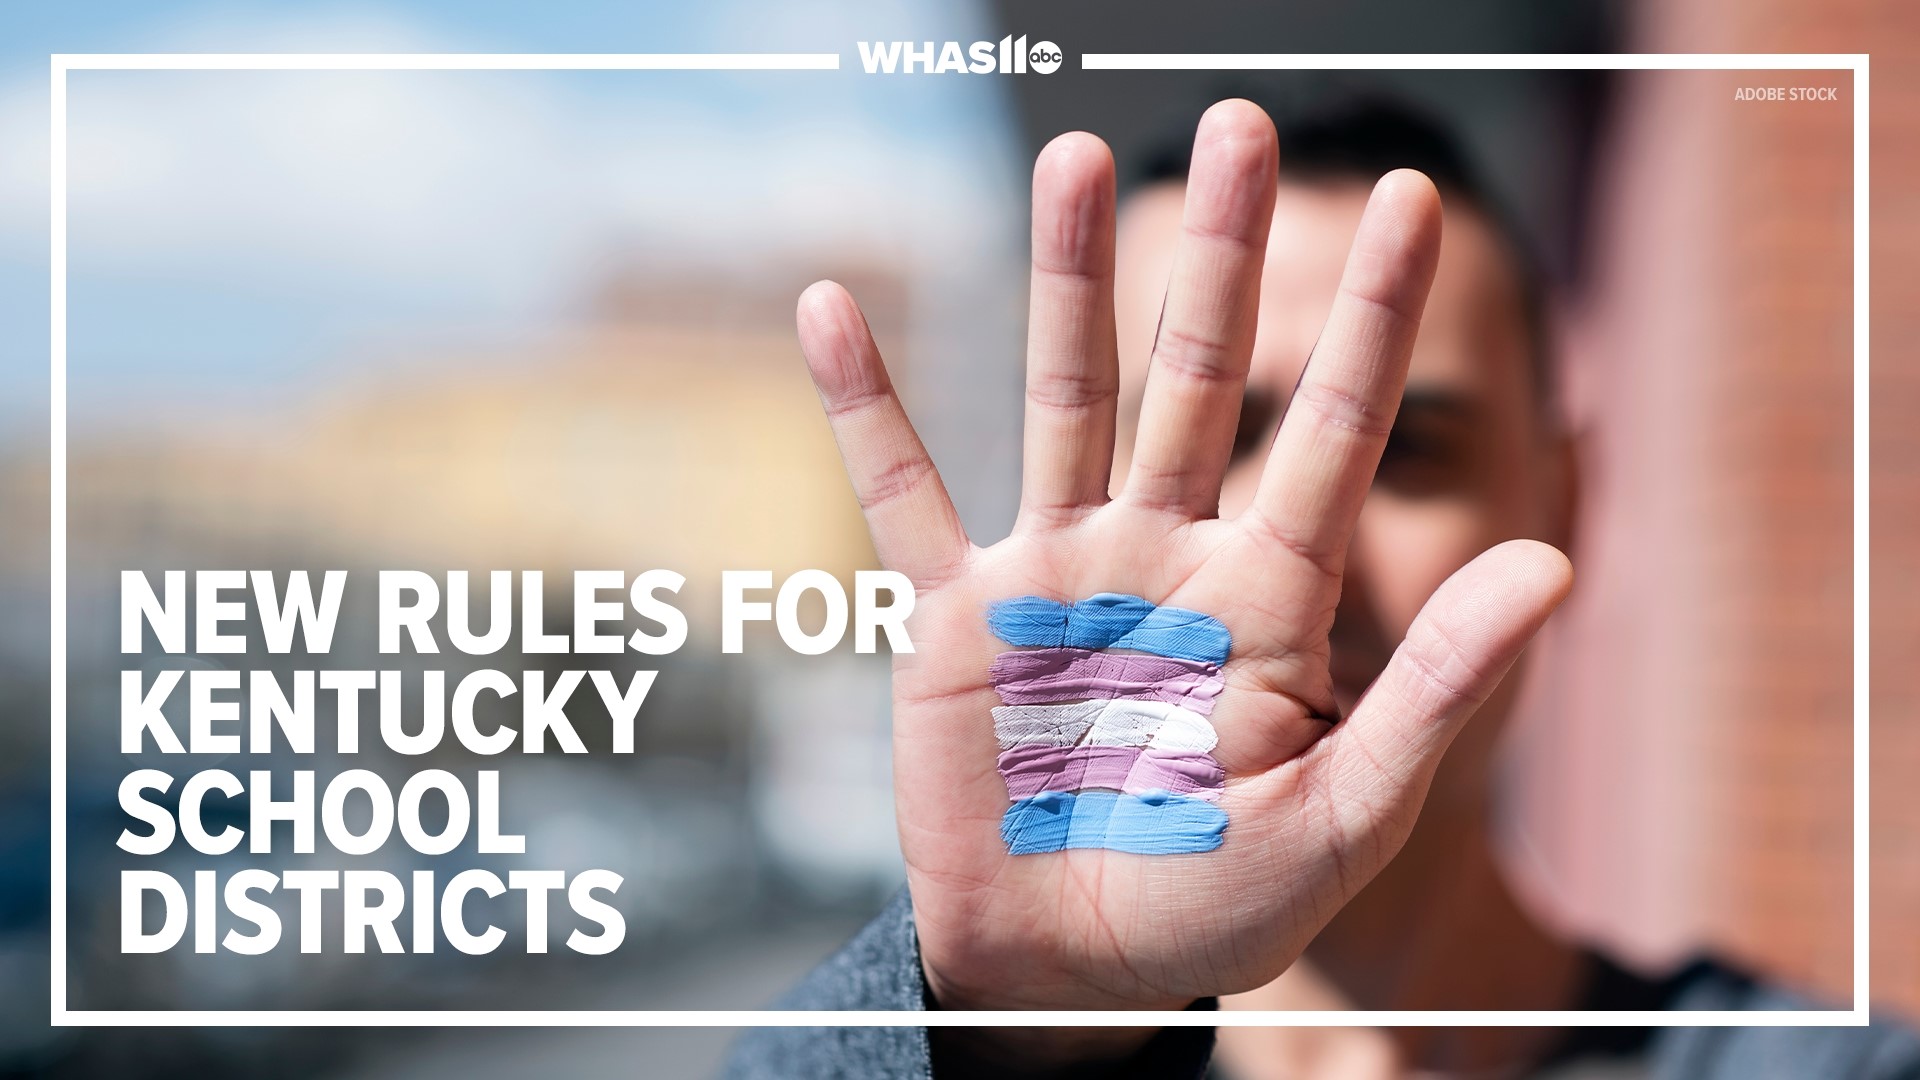 SB 150 requires school districts to create explicit bathroom policies and teachers can't discuss sexual orientation or gender identity, among other things.